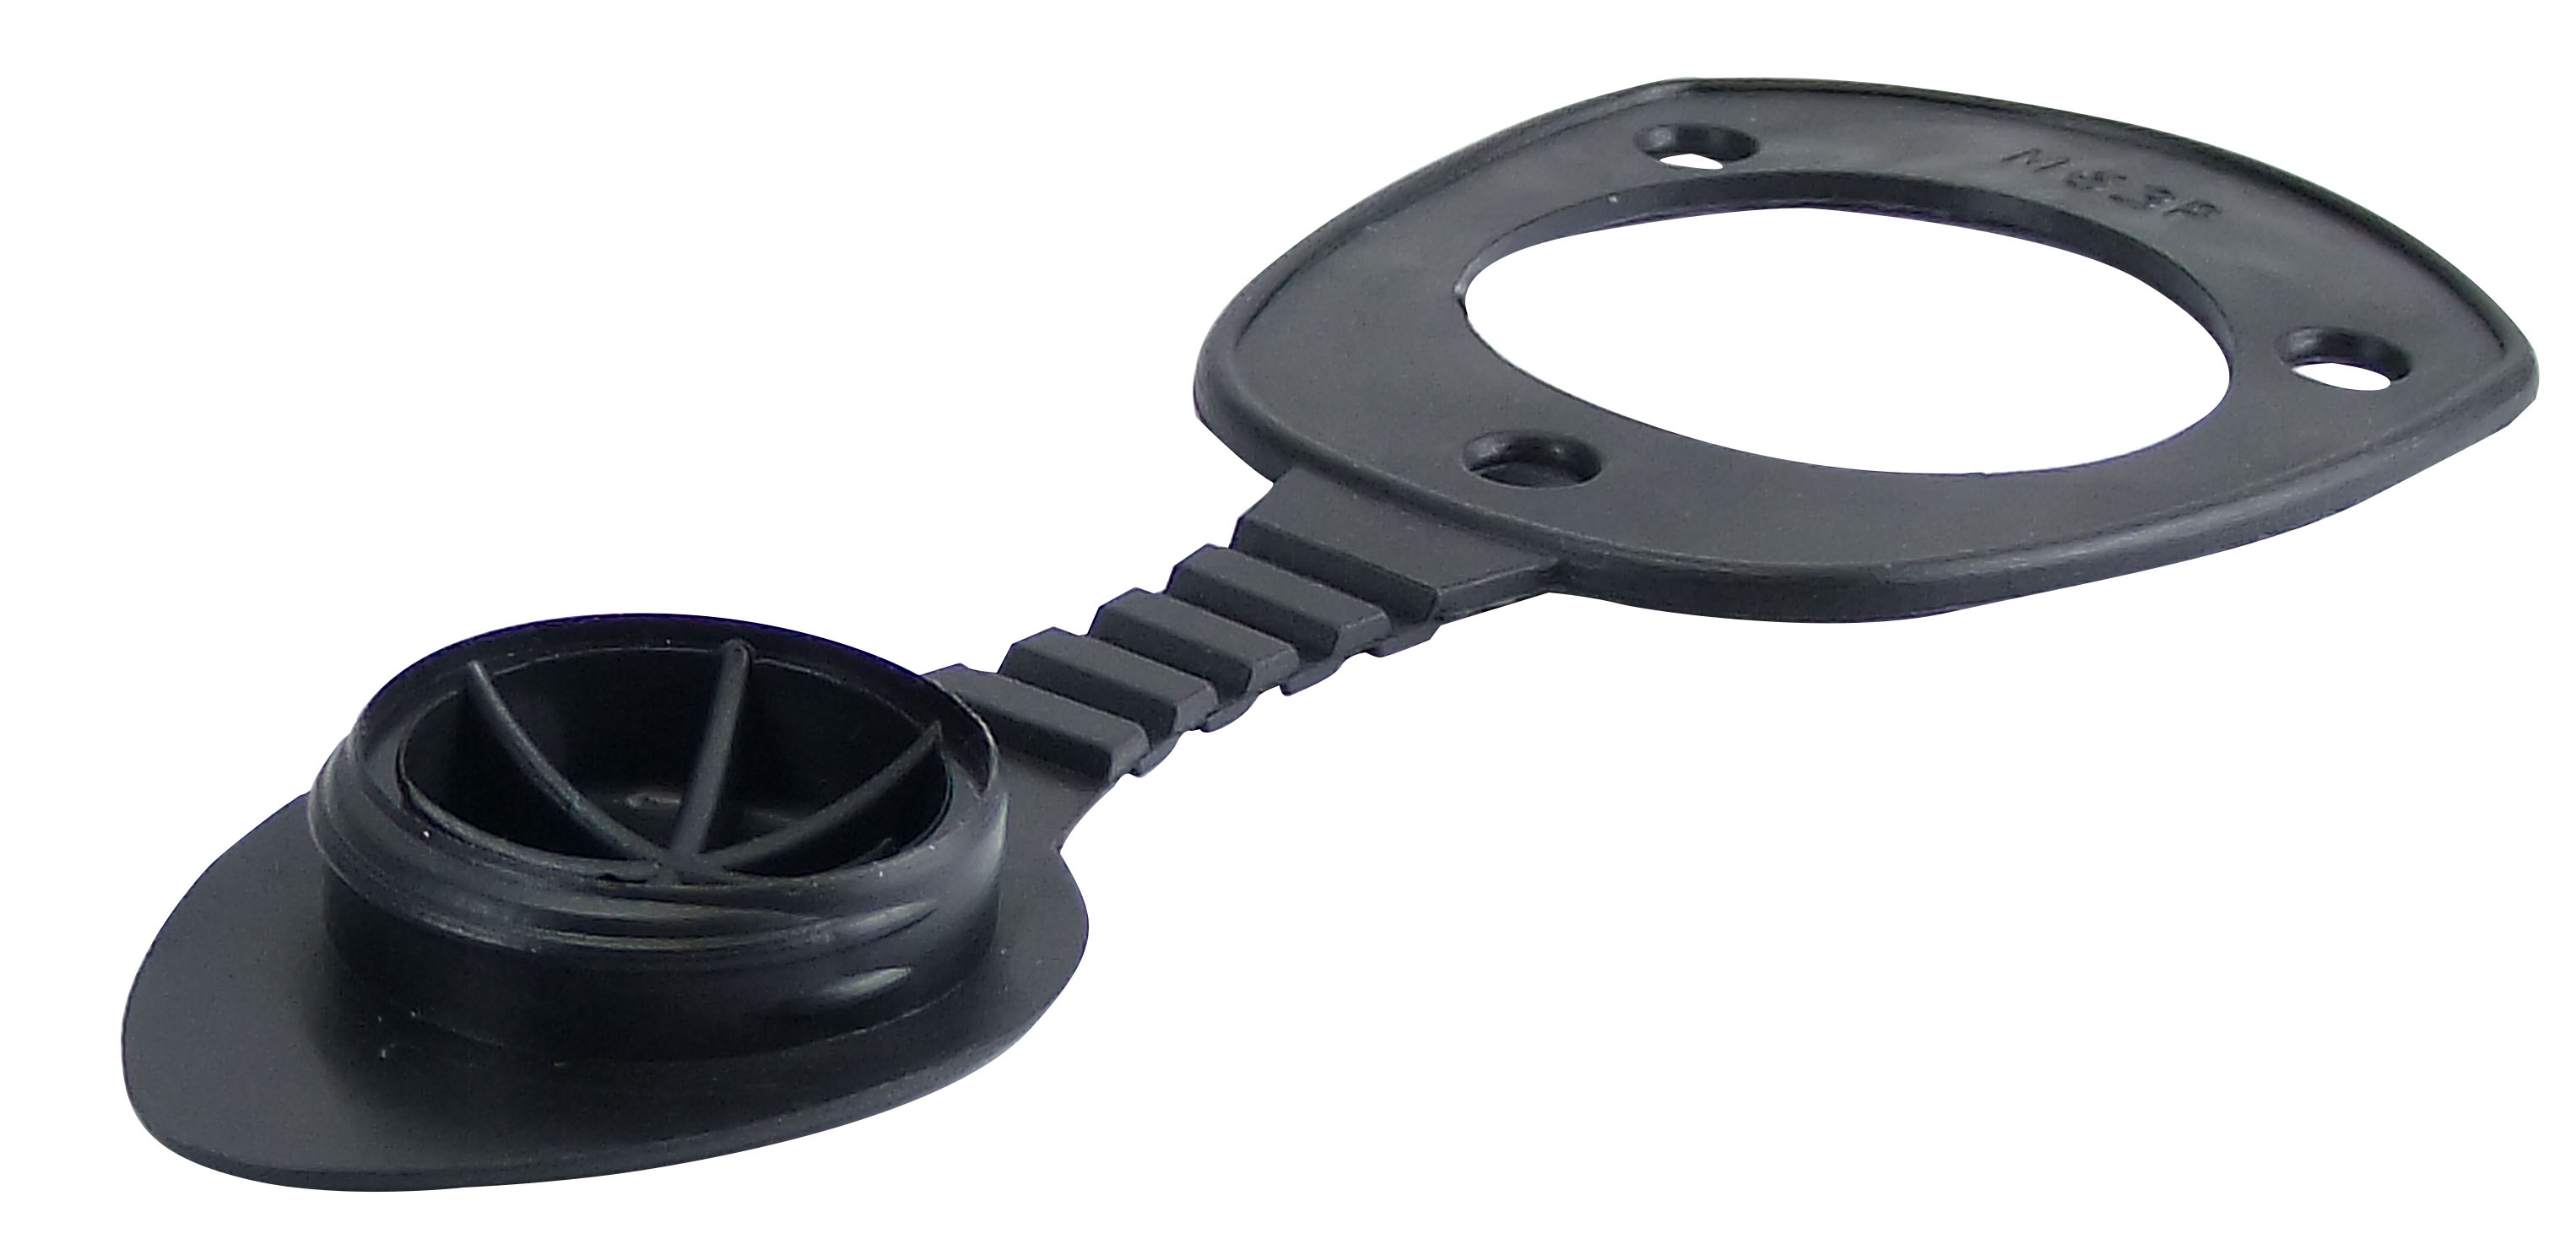 Plastic Rod Holder Caps Suits Oval Head 49222 - Black (49232) - Online  Boating Store - Boat Parts